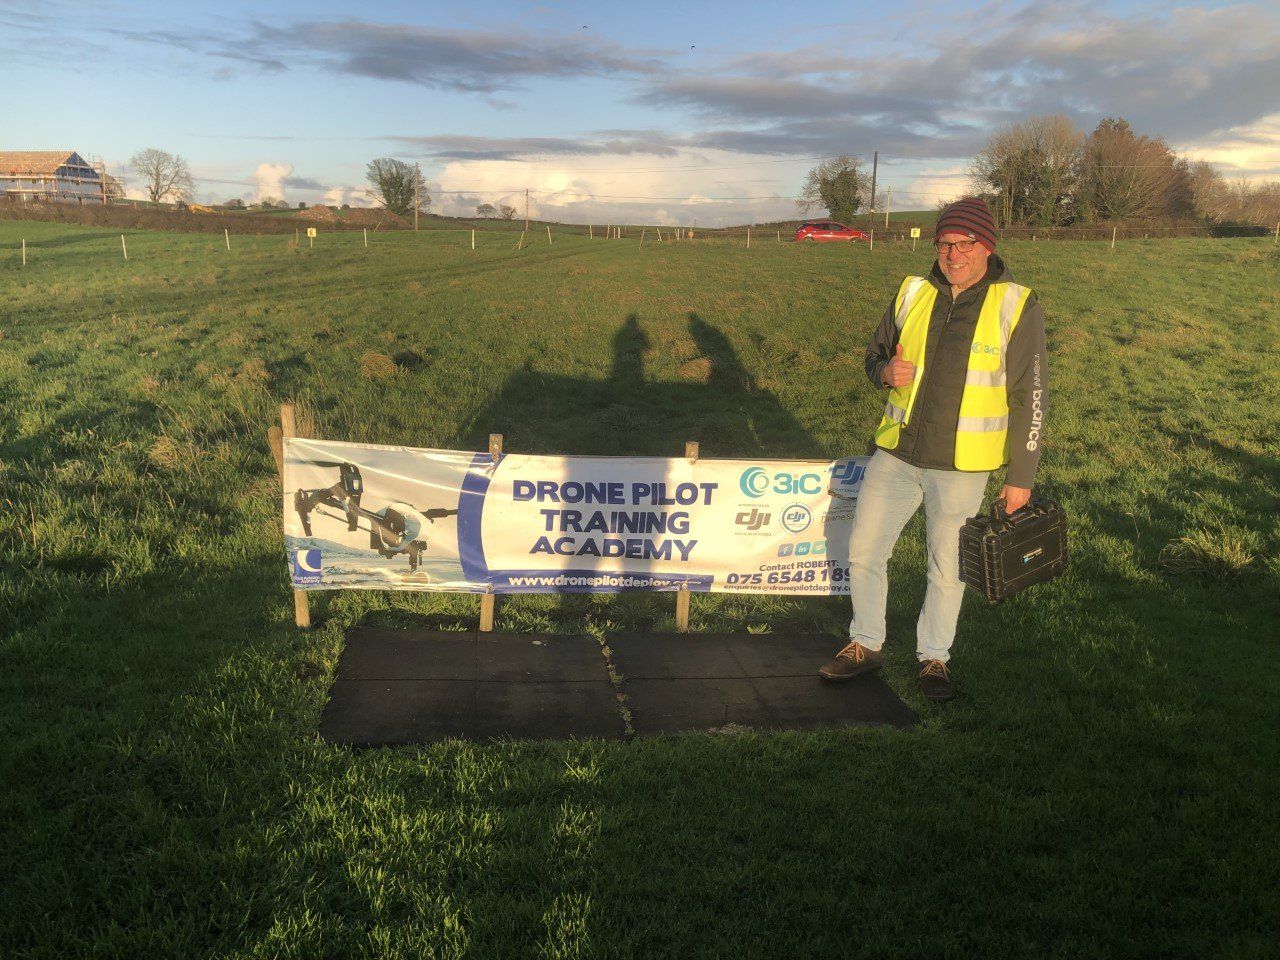 DRONE PILOT TRAINING ACADEMY BELFAST - CONGRATULATIONS TO DR KAHLERT WHO WORKS AT THE CENTRE FOR GIS & GEOMATICS SCHOOL OF NATURAL AND BUILT ENVIRONMENT QUEEN’S UNIVERSITY BELFAST SUCCESSFULLY PASSED HIS GVC DRONE EXAM ON 16TH NOVEMBER 2022. WELL DONE!